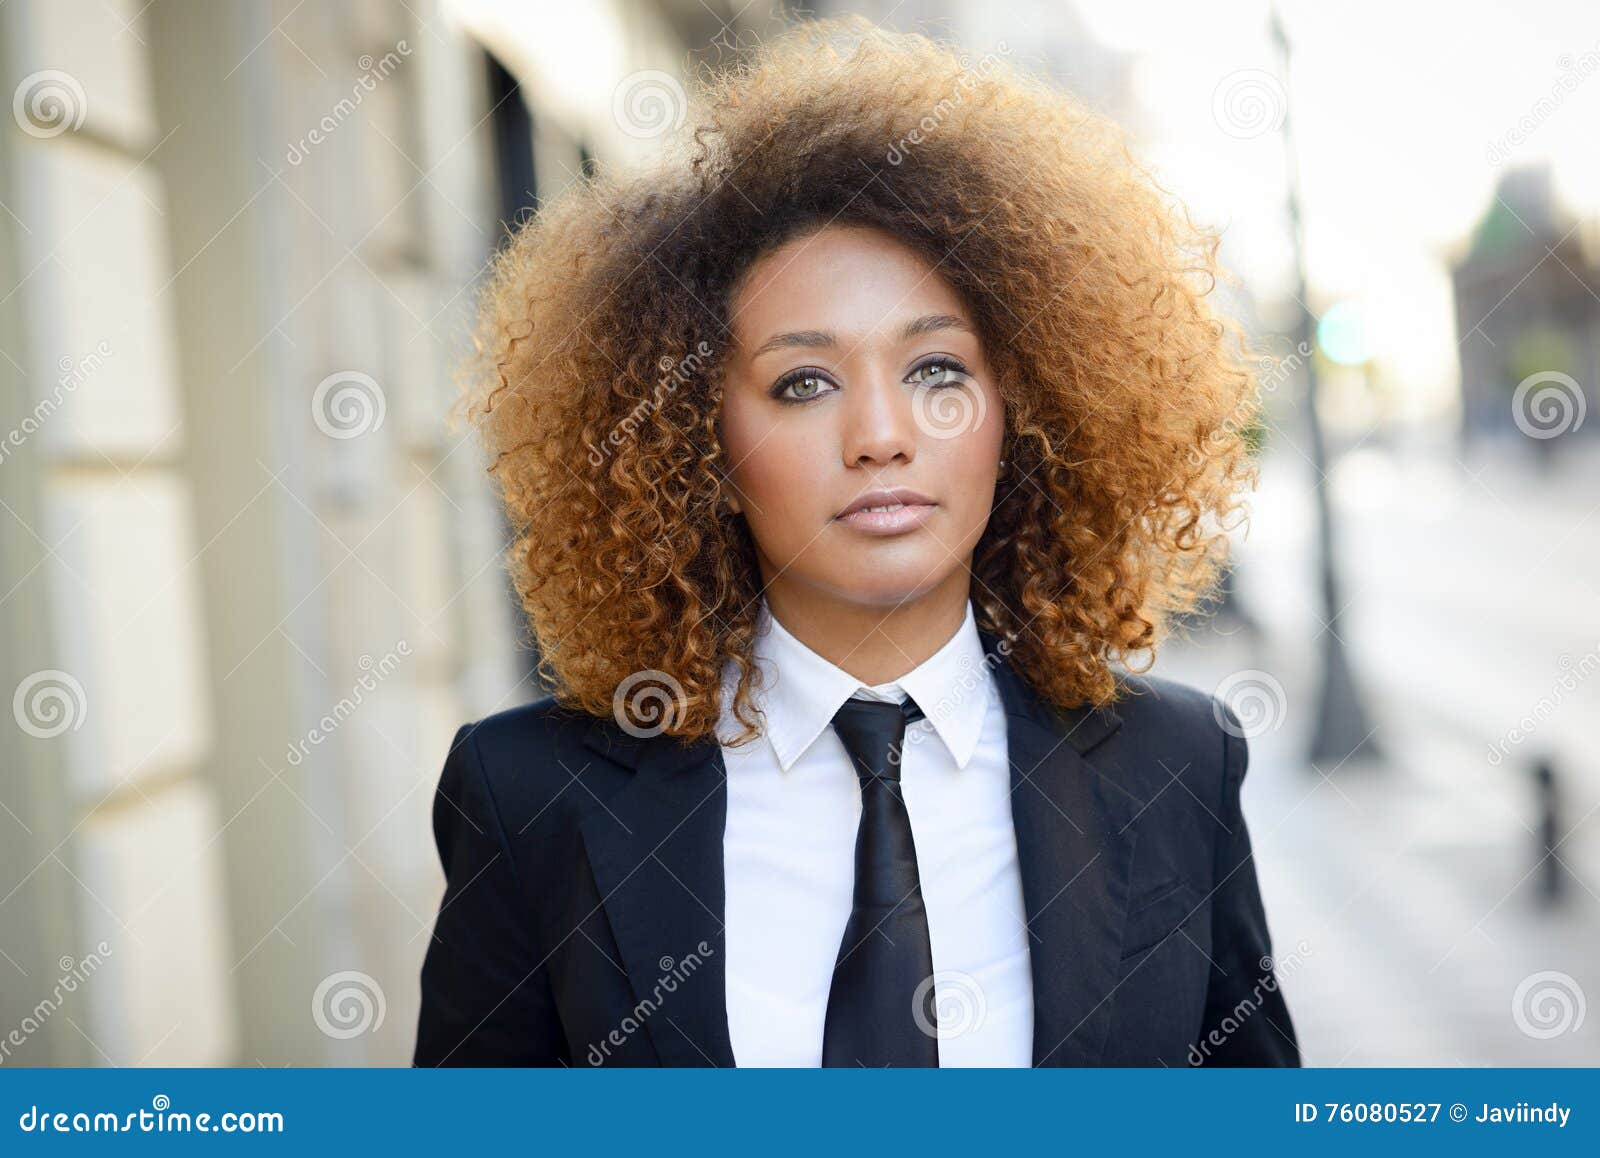 Black Businesswoman Wearing Suit and Tie in Urban Background Stock ...